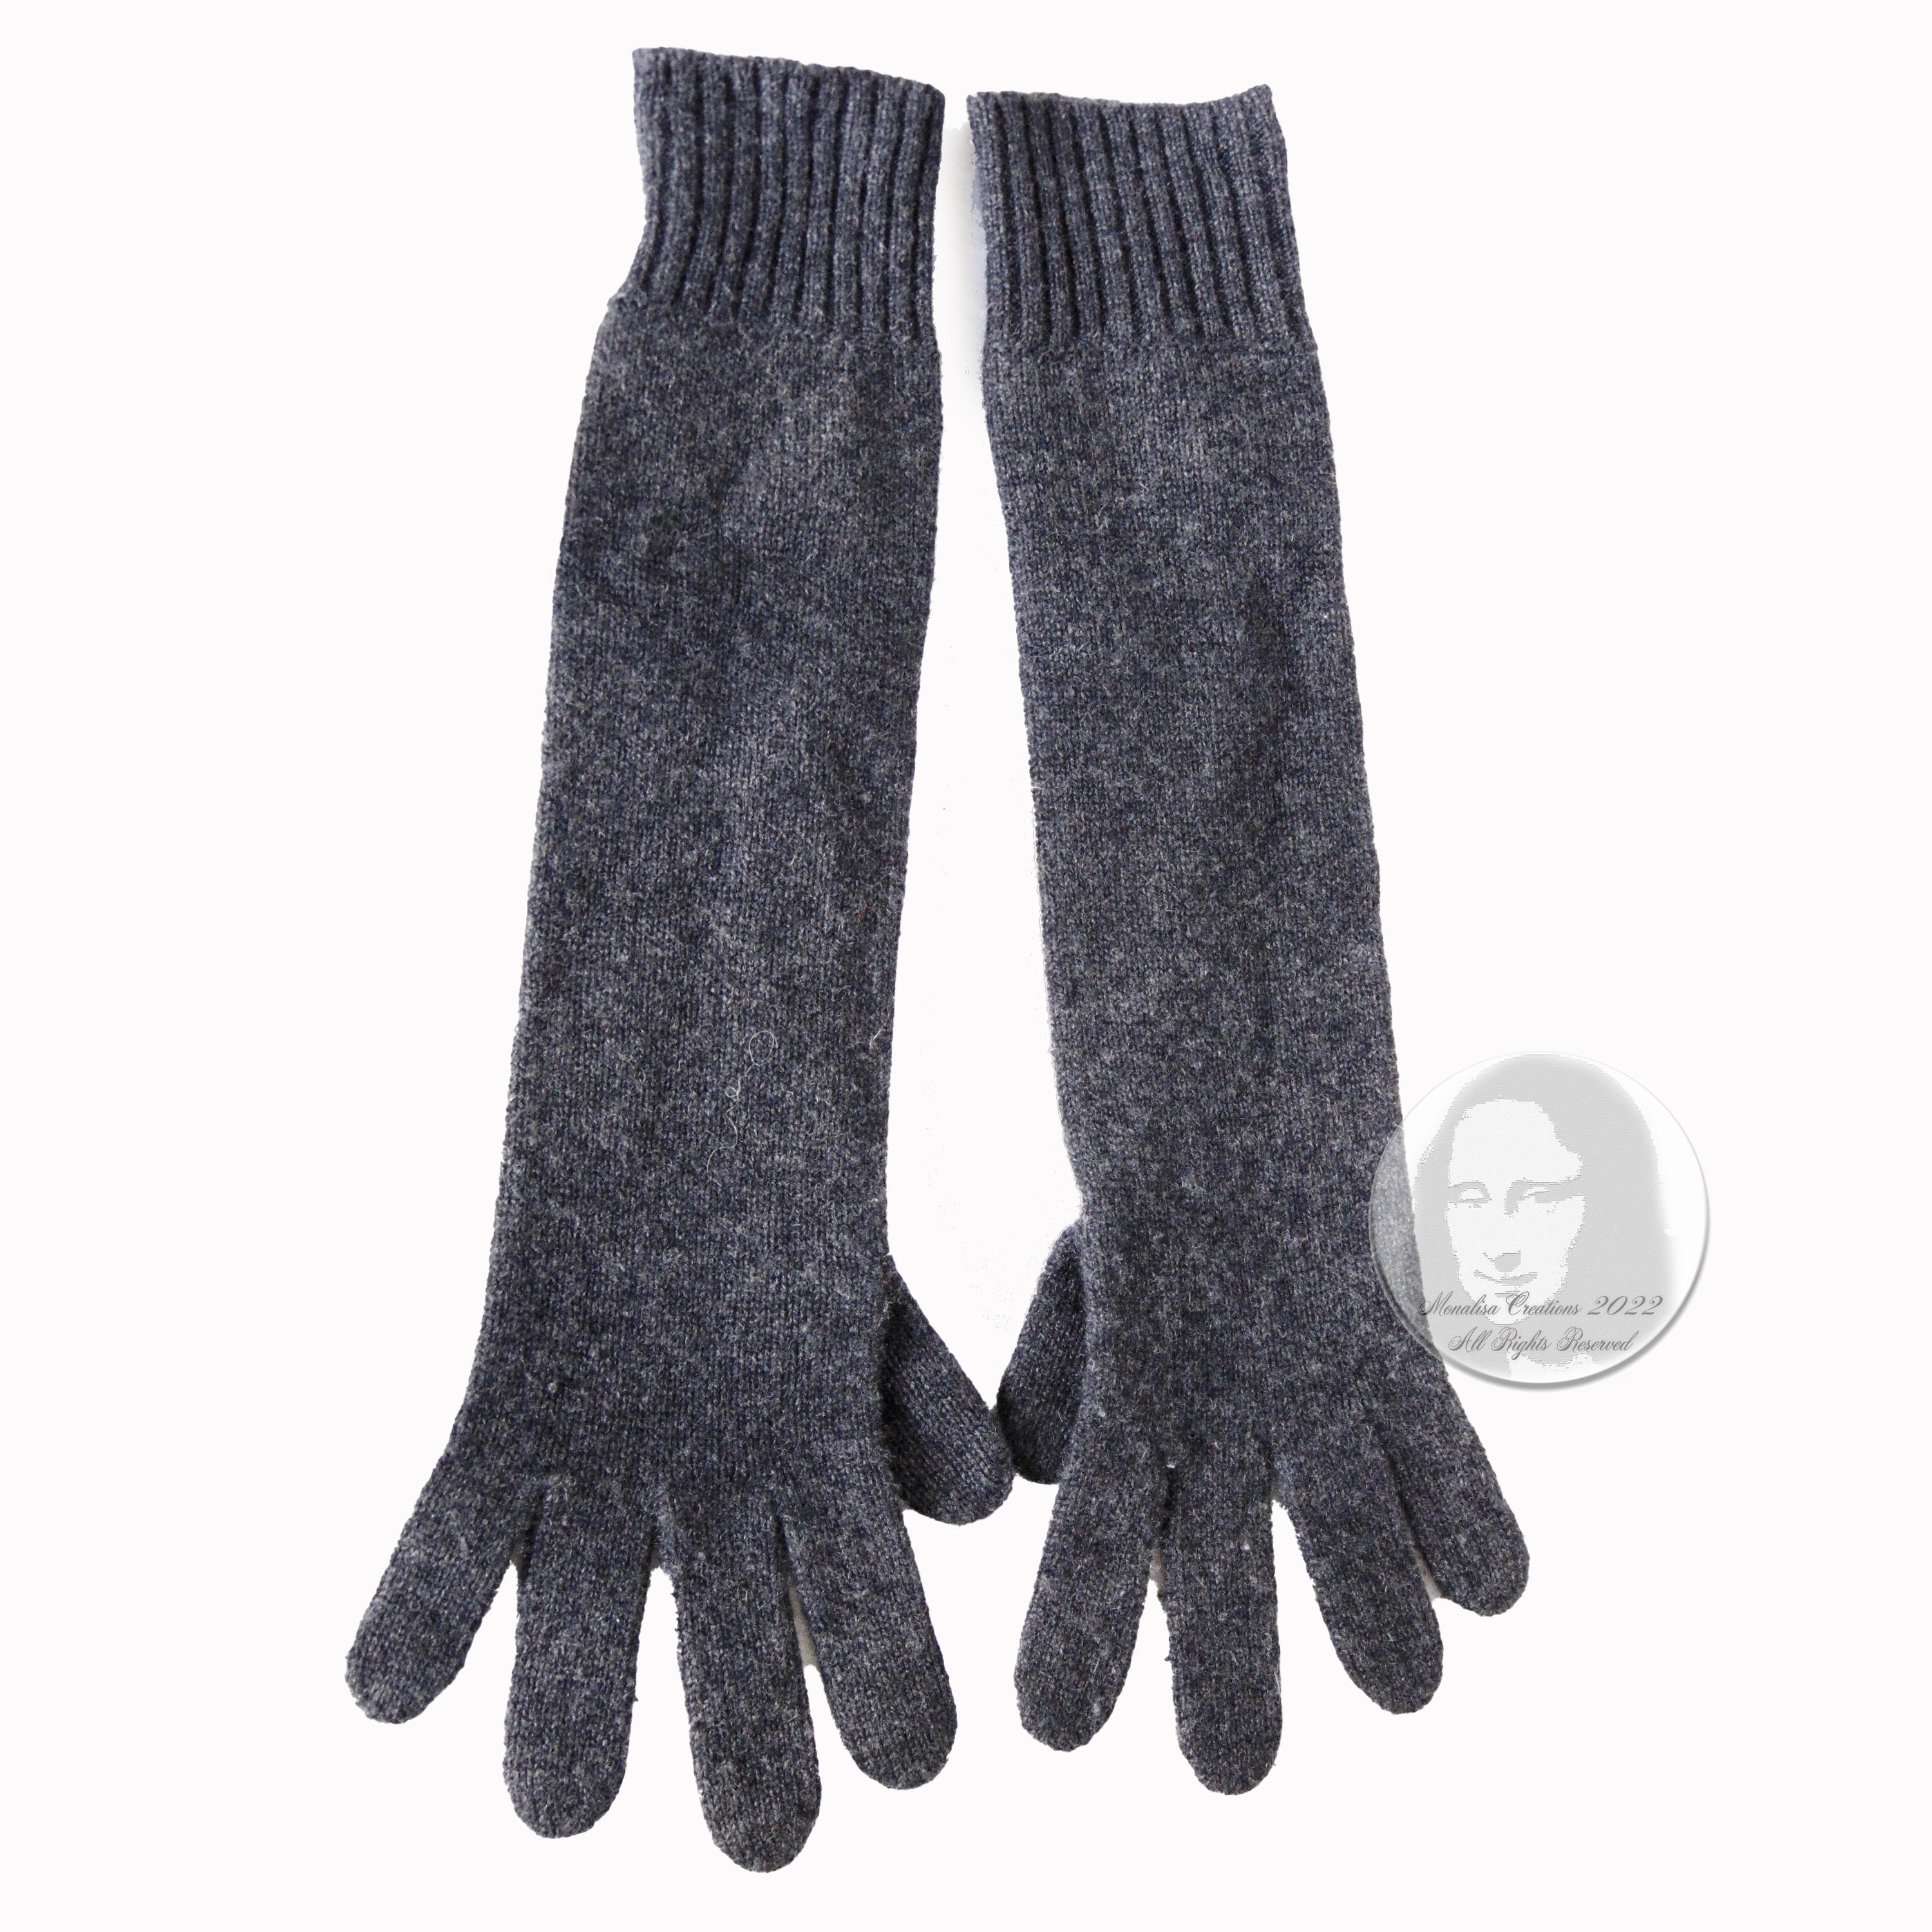 Authentic, preowned Hermes Ladies Cashmere Wool Gloves, size 00. Unlined/slip on. Fabulous and extremely soft, these chic gloves will keep you toasty while looking stylish!  

Made in Italy.  100% Cashmere.  Dry clean recommended.

Tagged size 00,